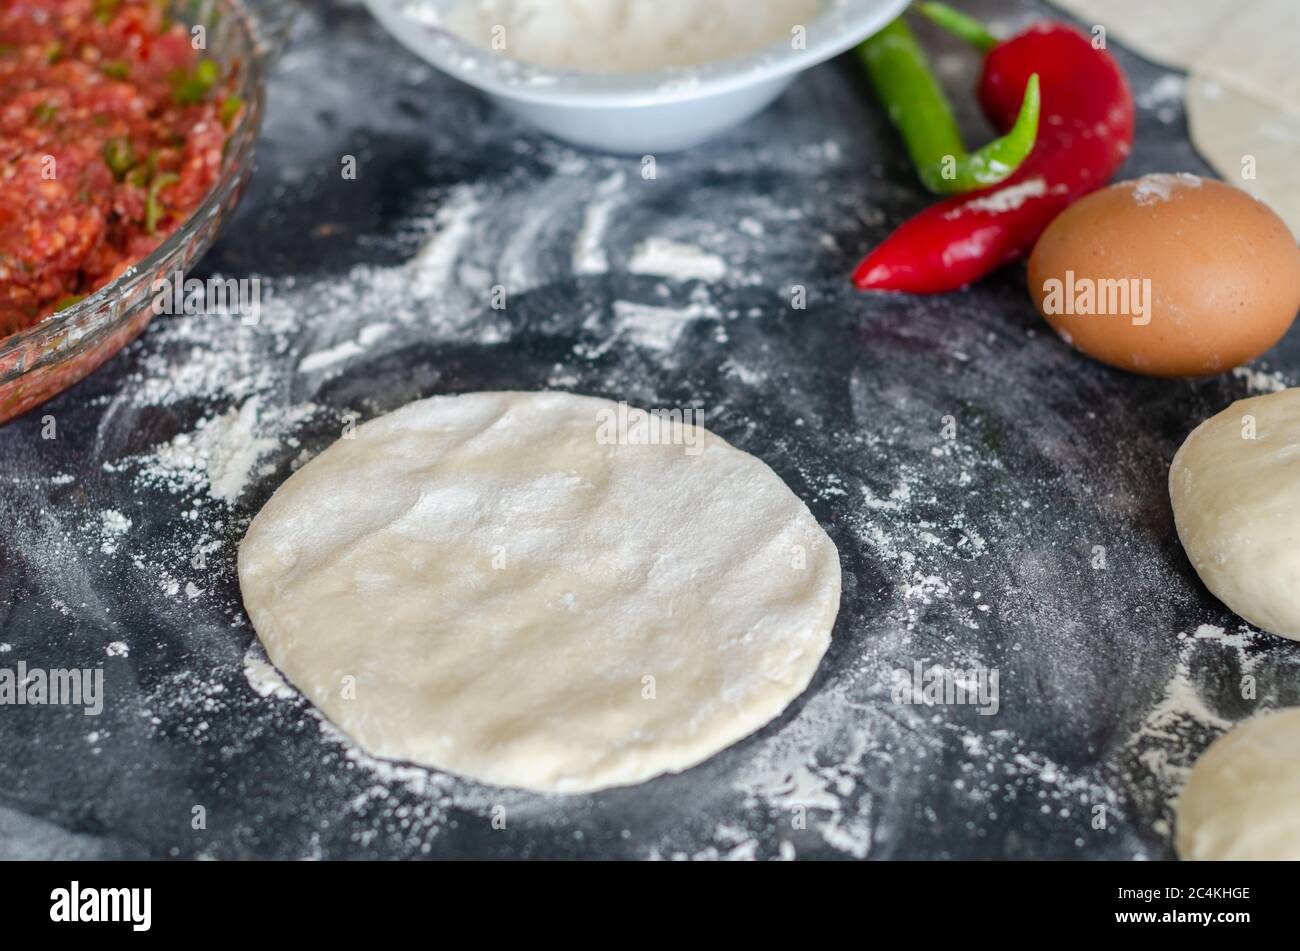 Turkish lahmacun dough and minced meat,egg,pepper on the table , top view.Concept of home cooking, baking at home. Stock Photo